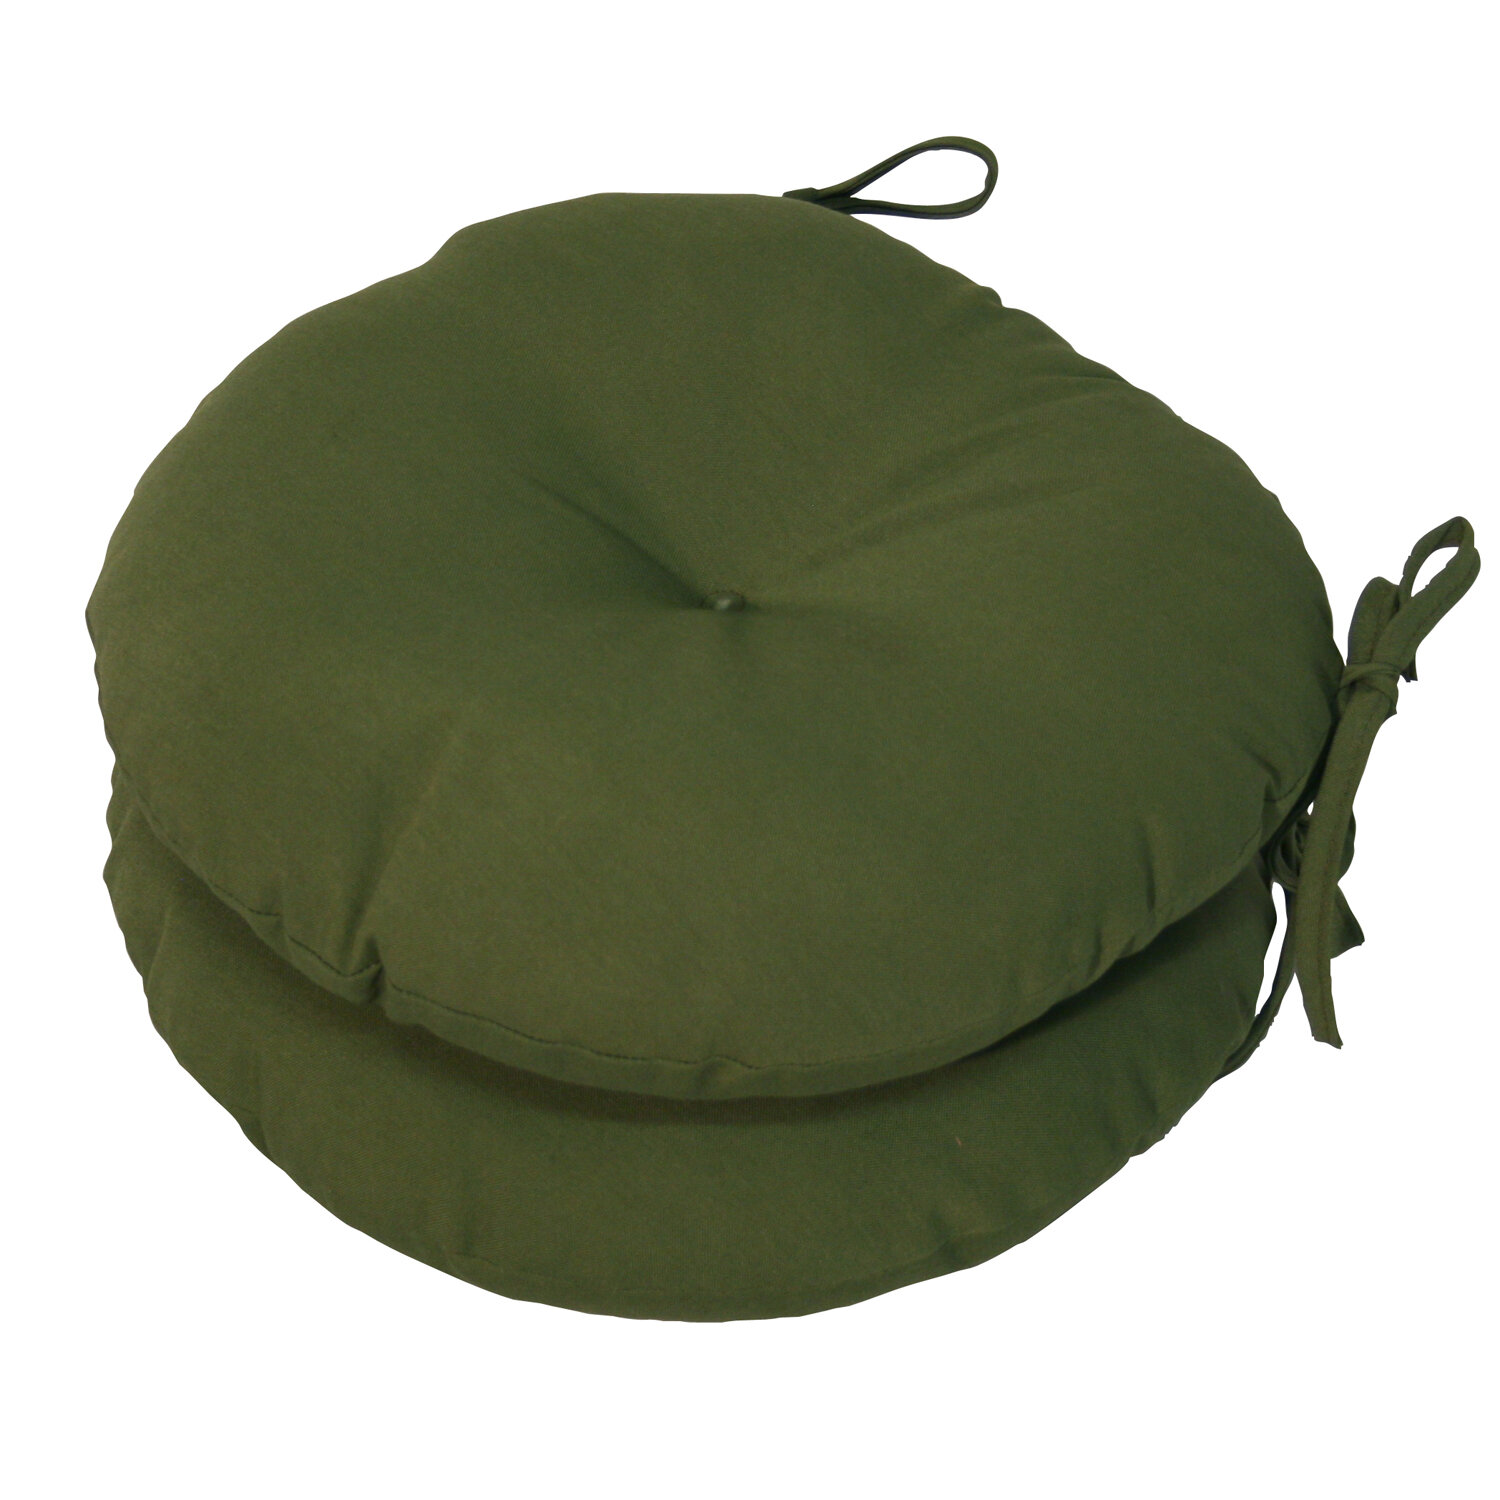 Greendale Home Fashions Bistro Chair Round Outdoor Cushion